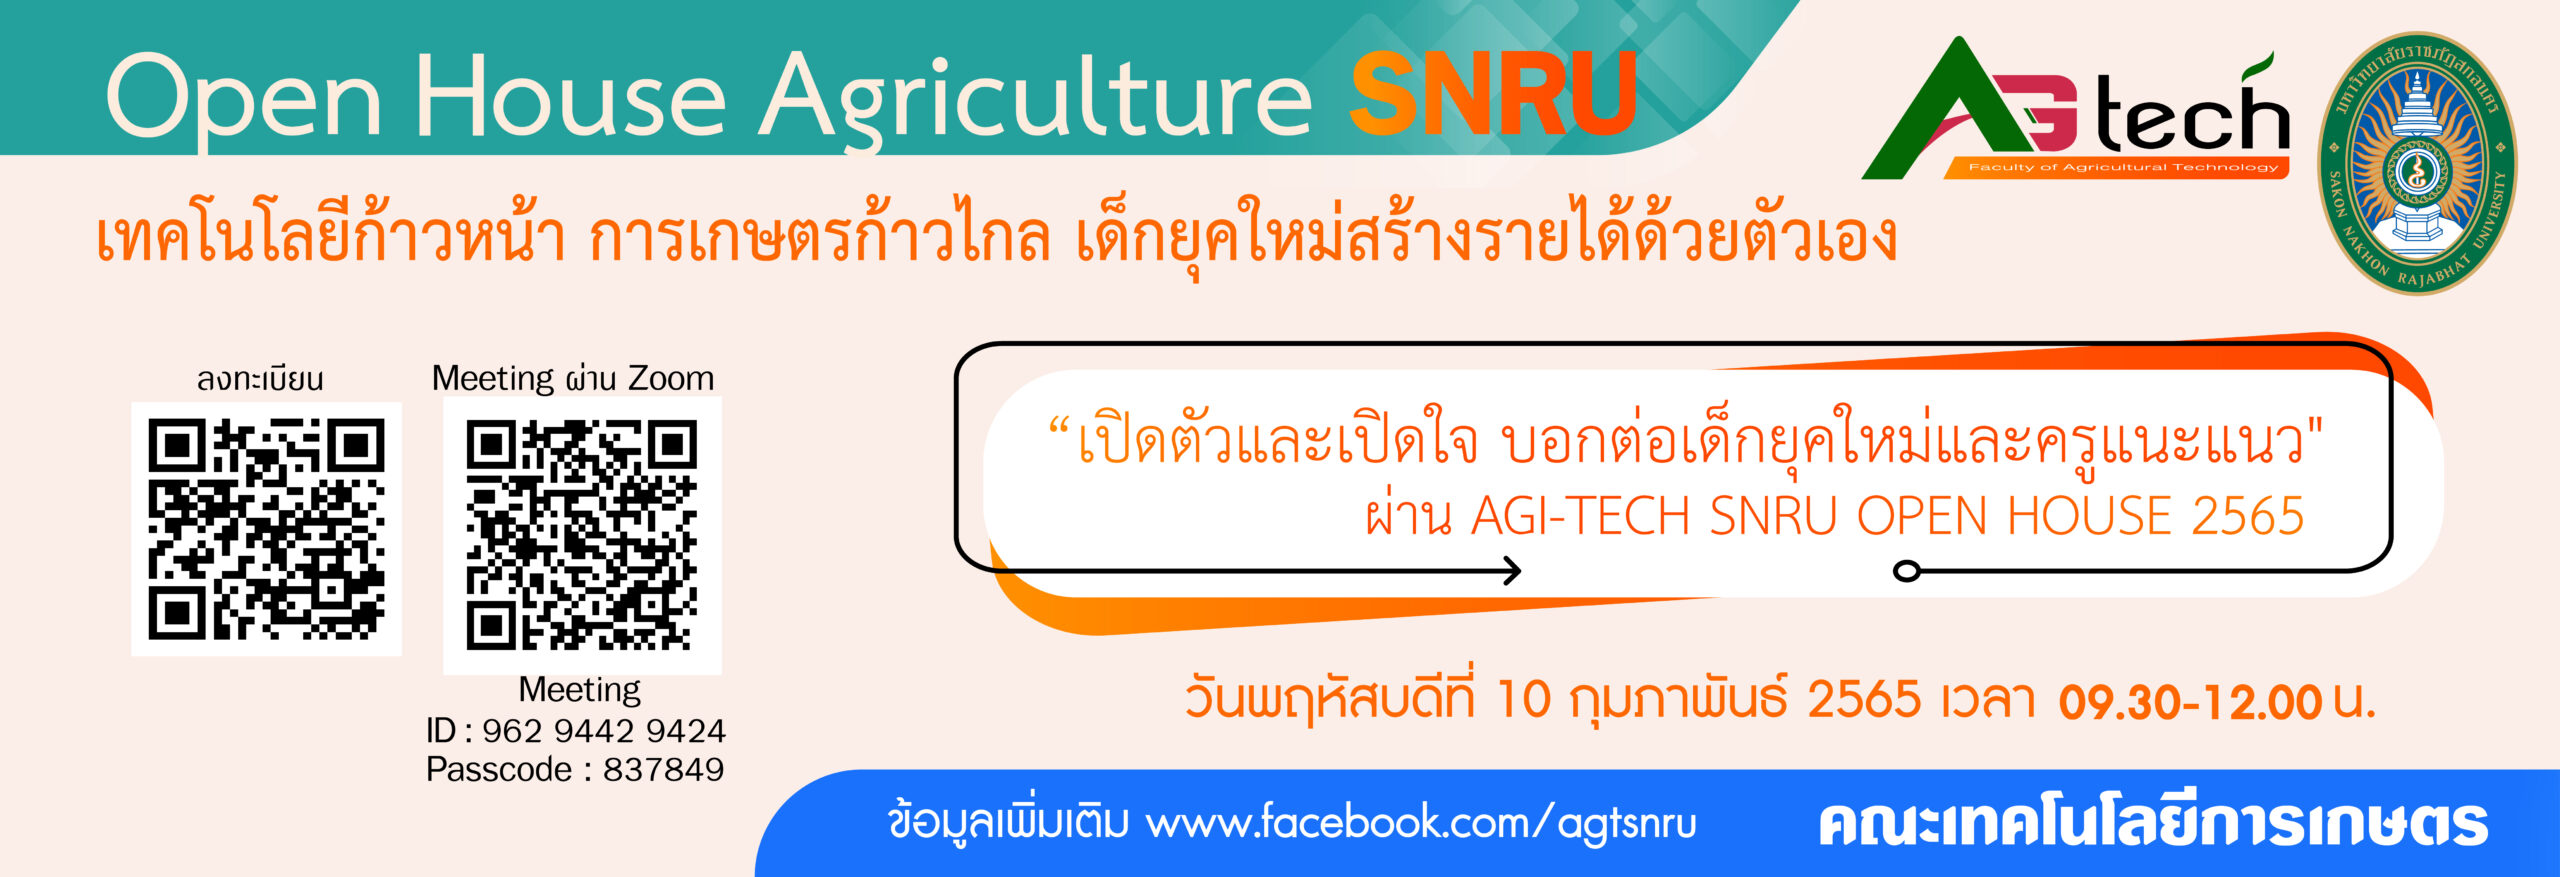 BN Open House Agriculture SNRU 2565